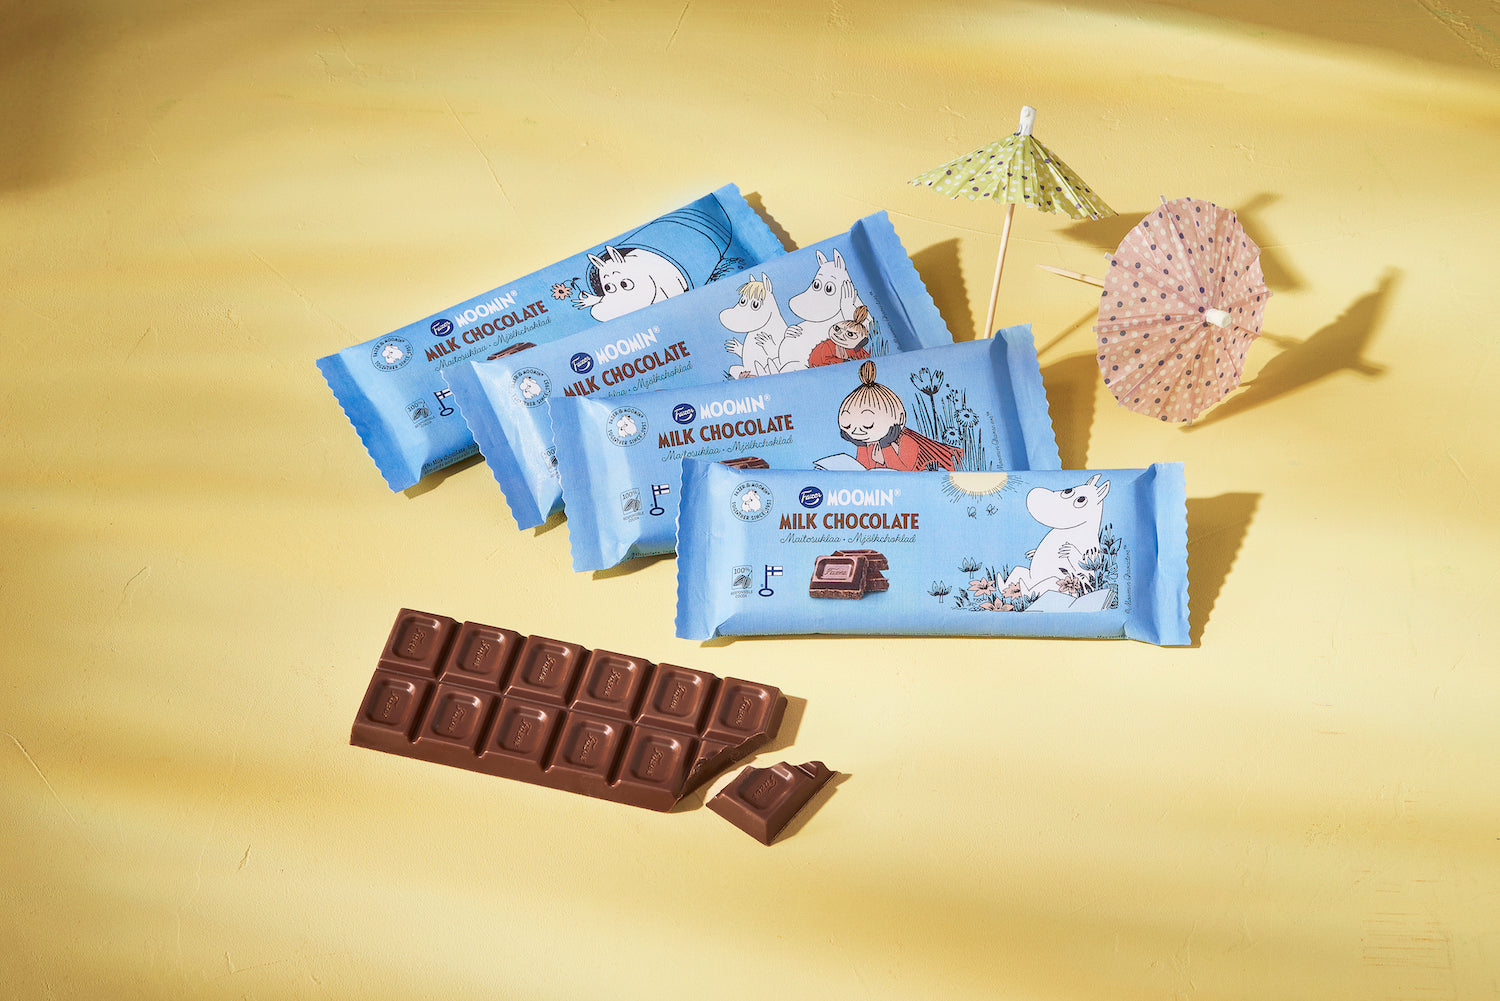 Four bars of Moomin chocolate in their wrappers and one open chocolate bar 